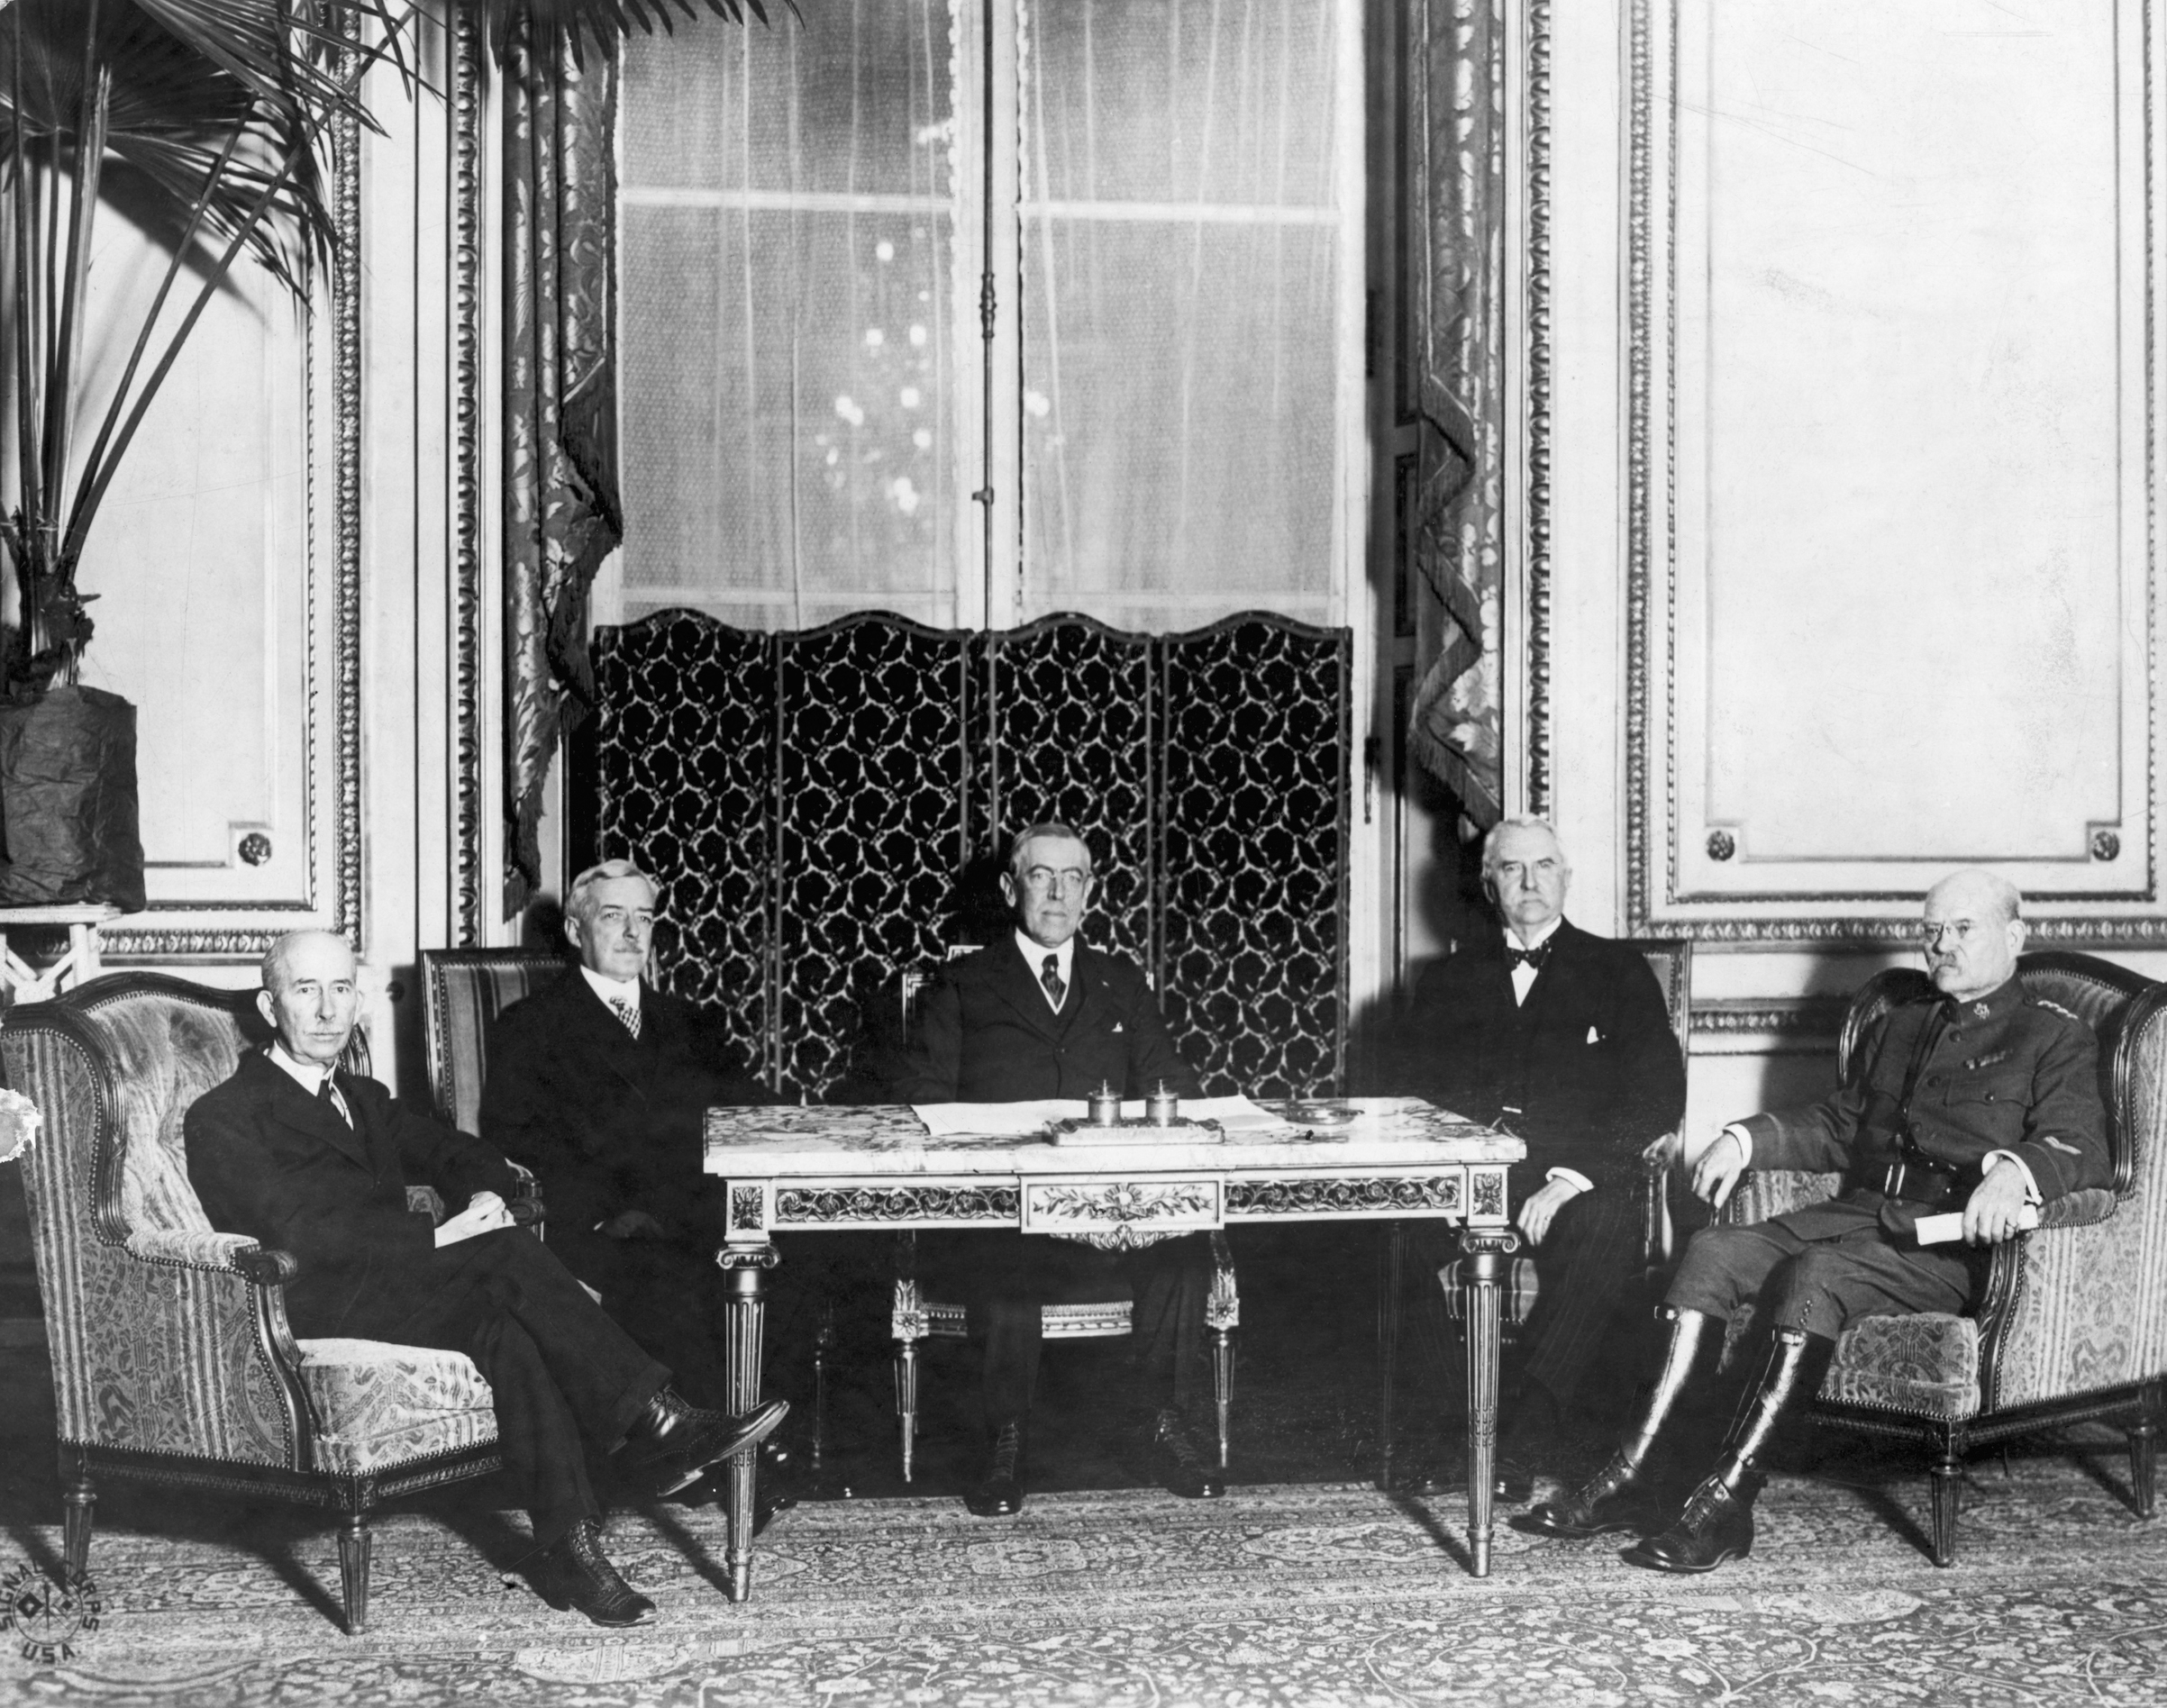 The American delegation at the Versailles Conference. From left to right--House, Lansing, Wilson, Henry White, Gen. Bliss. Undated photograph. (Bettmann/Getty Images)